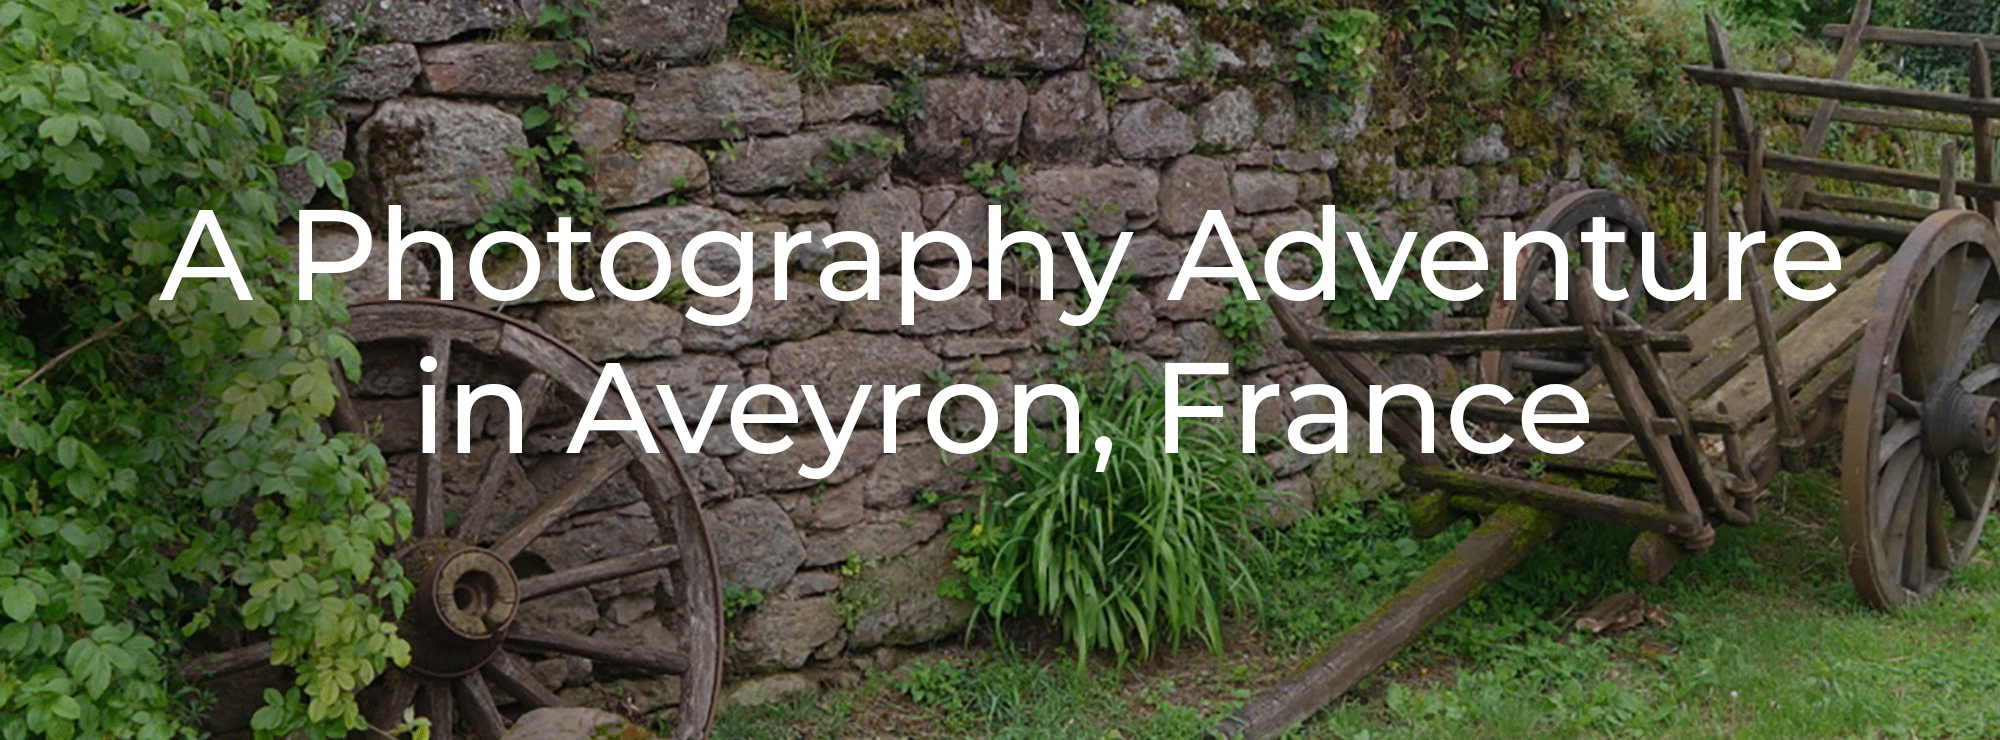 A Photography Adventure in Aveyron France